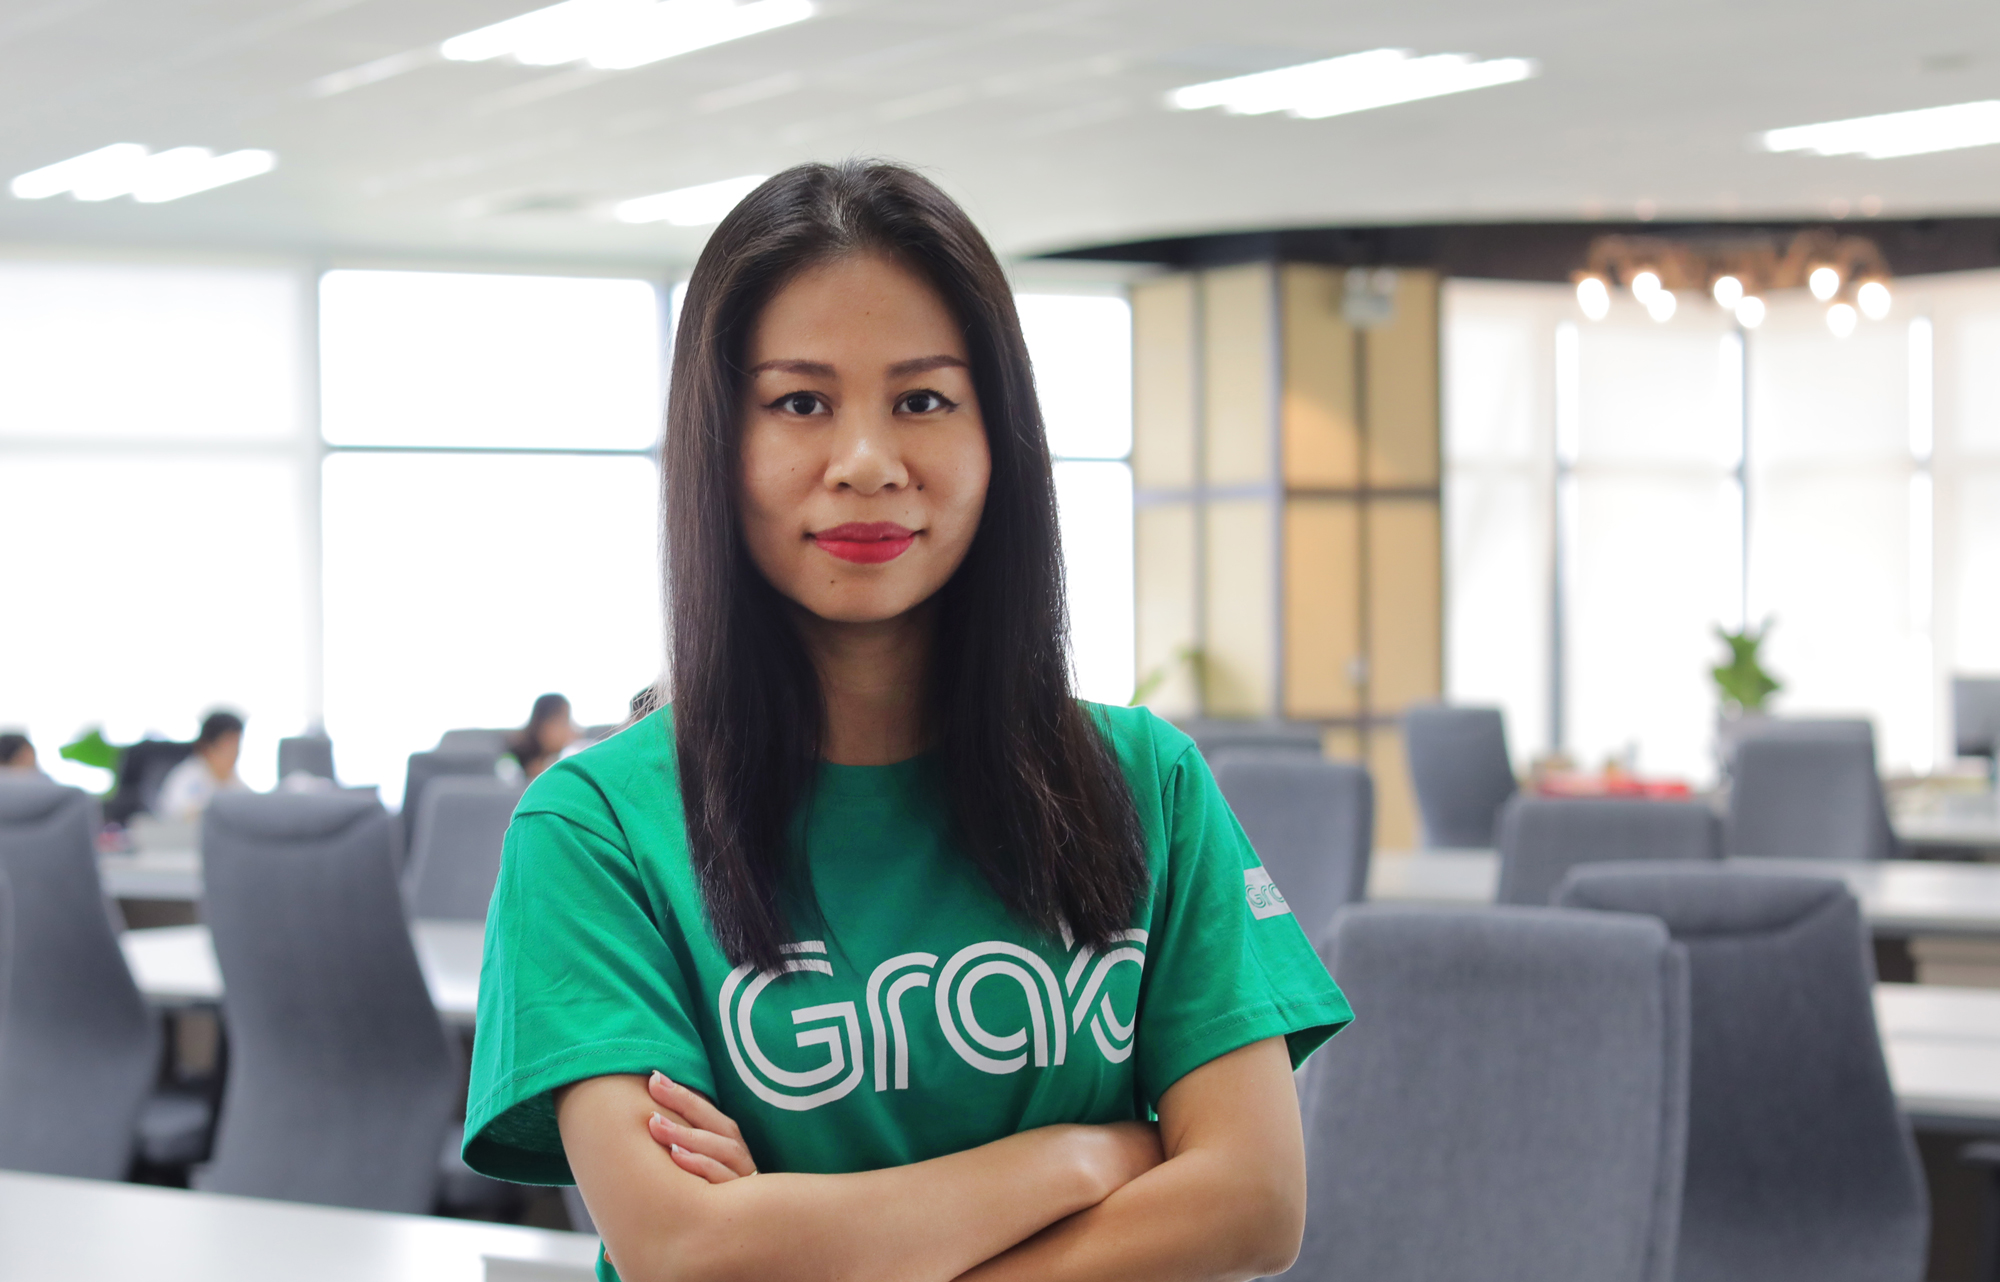 Grab appoints former Unilever executive to take driver’s seat in Vietnam operations